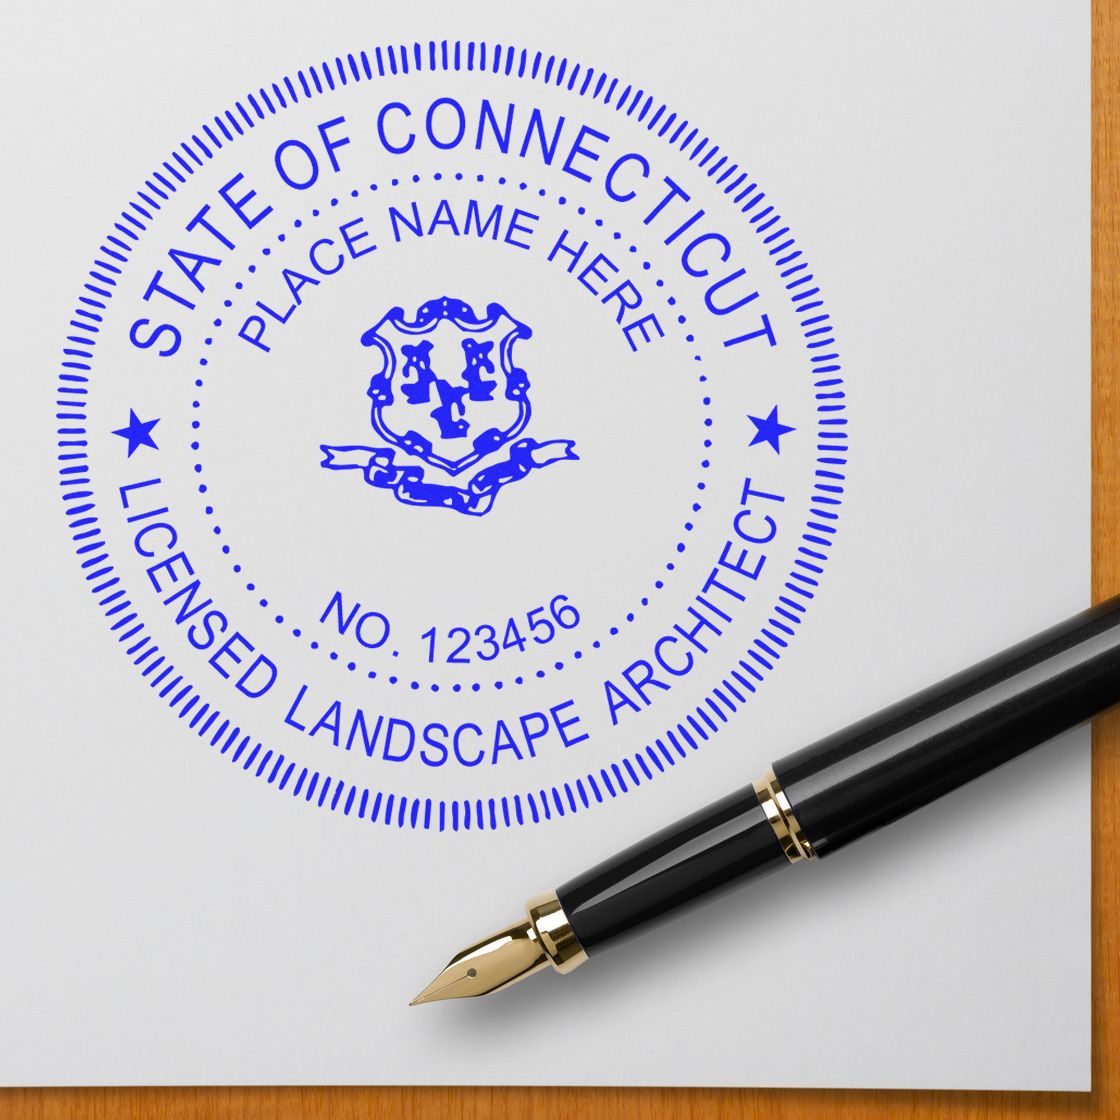 The Digital Connecticut Landscape Architect Stamp stamp impression comes to life with a crisp, detailed photo on paper - showcasing true professional quality.